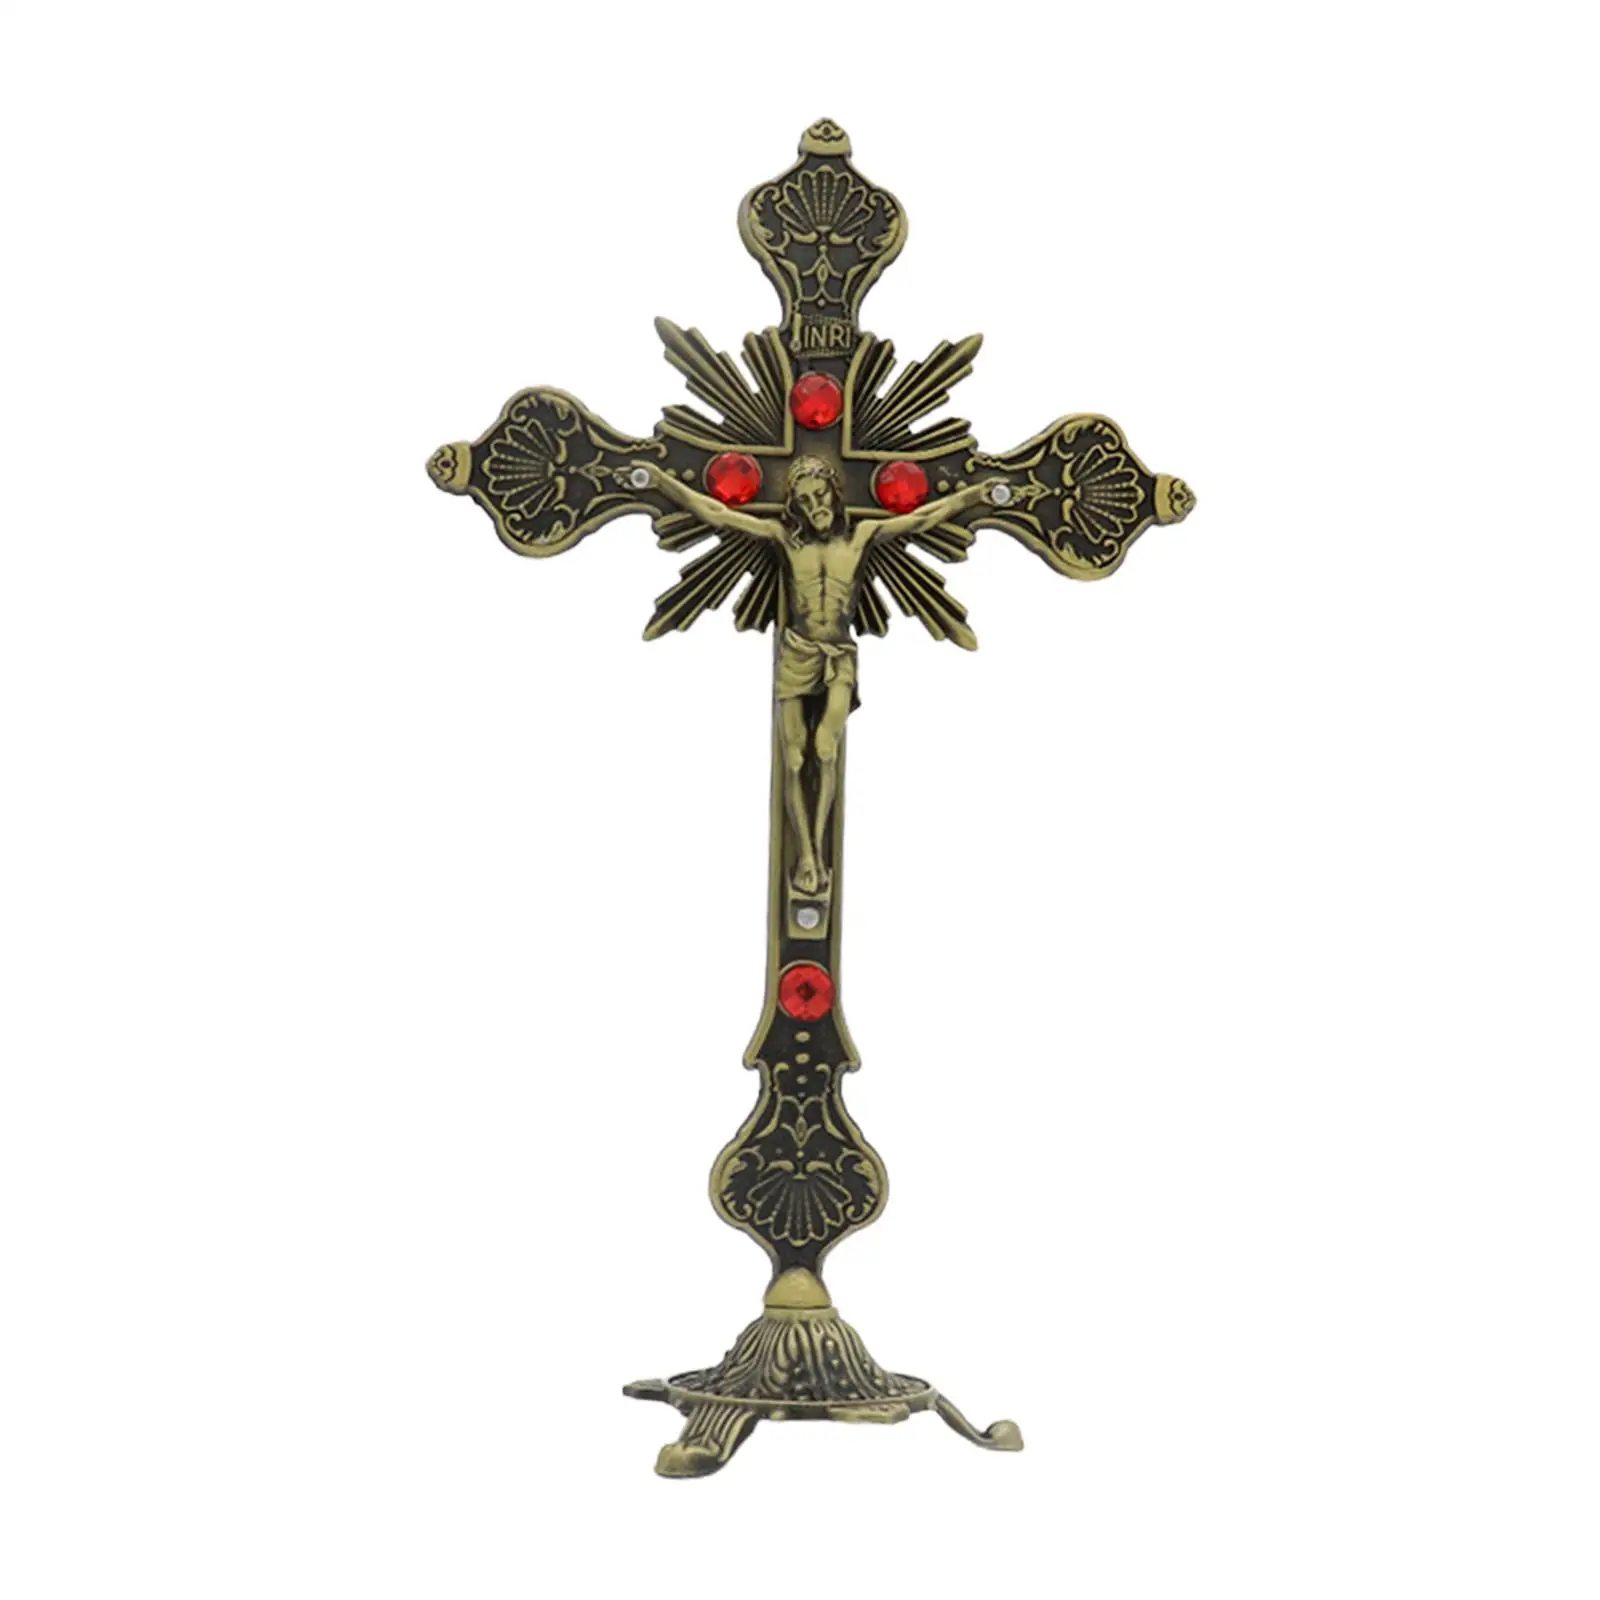 Jesus Crucifix Crucifix with Stand for Shelf Home Decor Christian Decoration